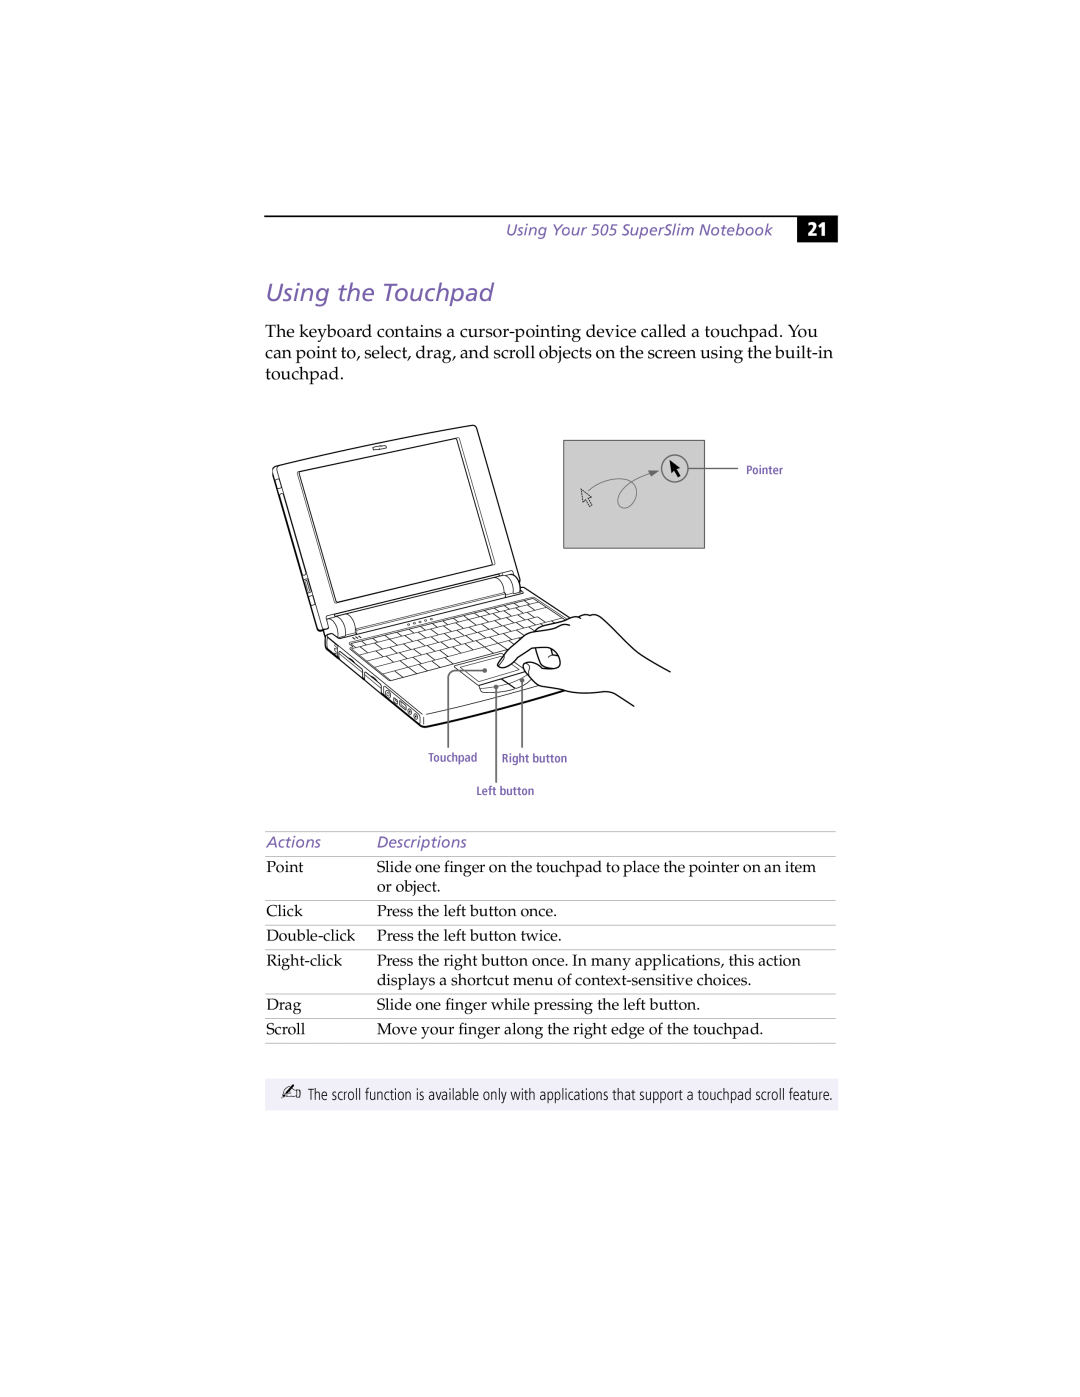 Sony PCG505FX manual TouchpadLeftbuttonRightbutton, UsingYour505SuperSlimNotebook 